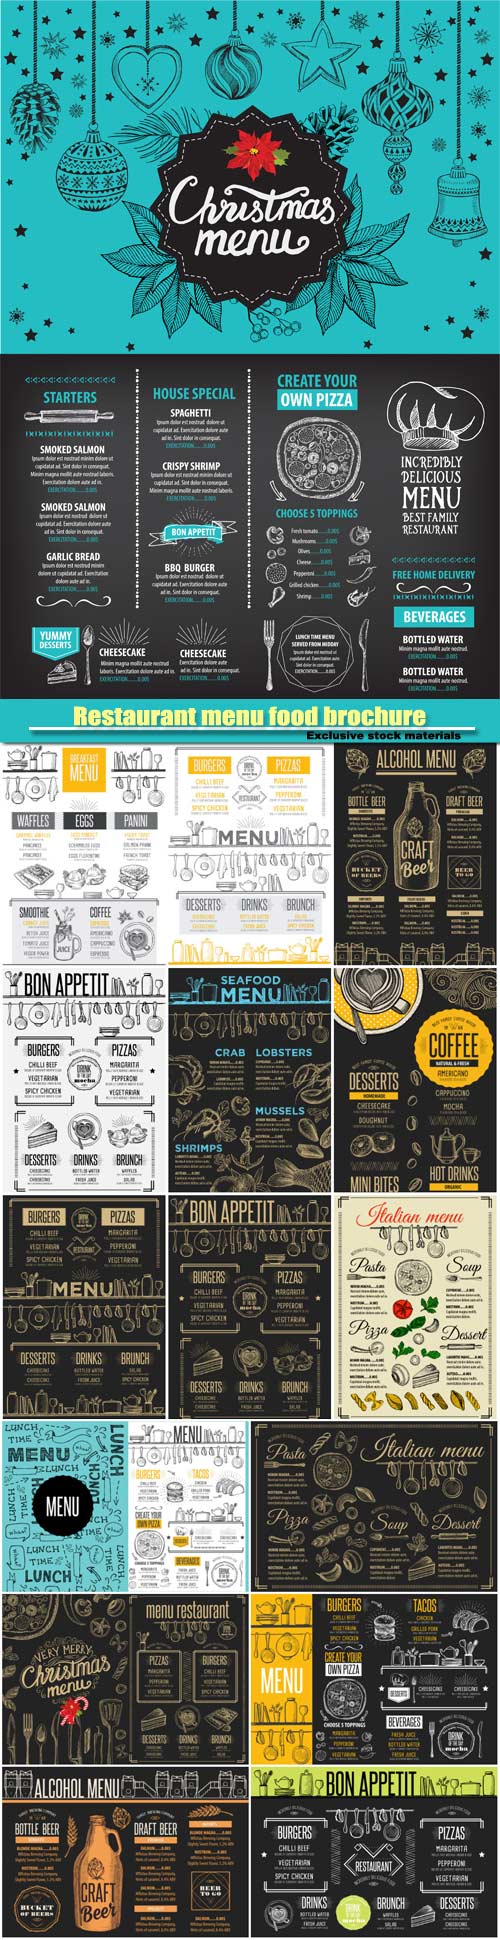 Restaurant menu placemat food brochure, cafe template design, vintage creative dinner flyer with hand-drawn graphic